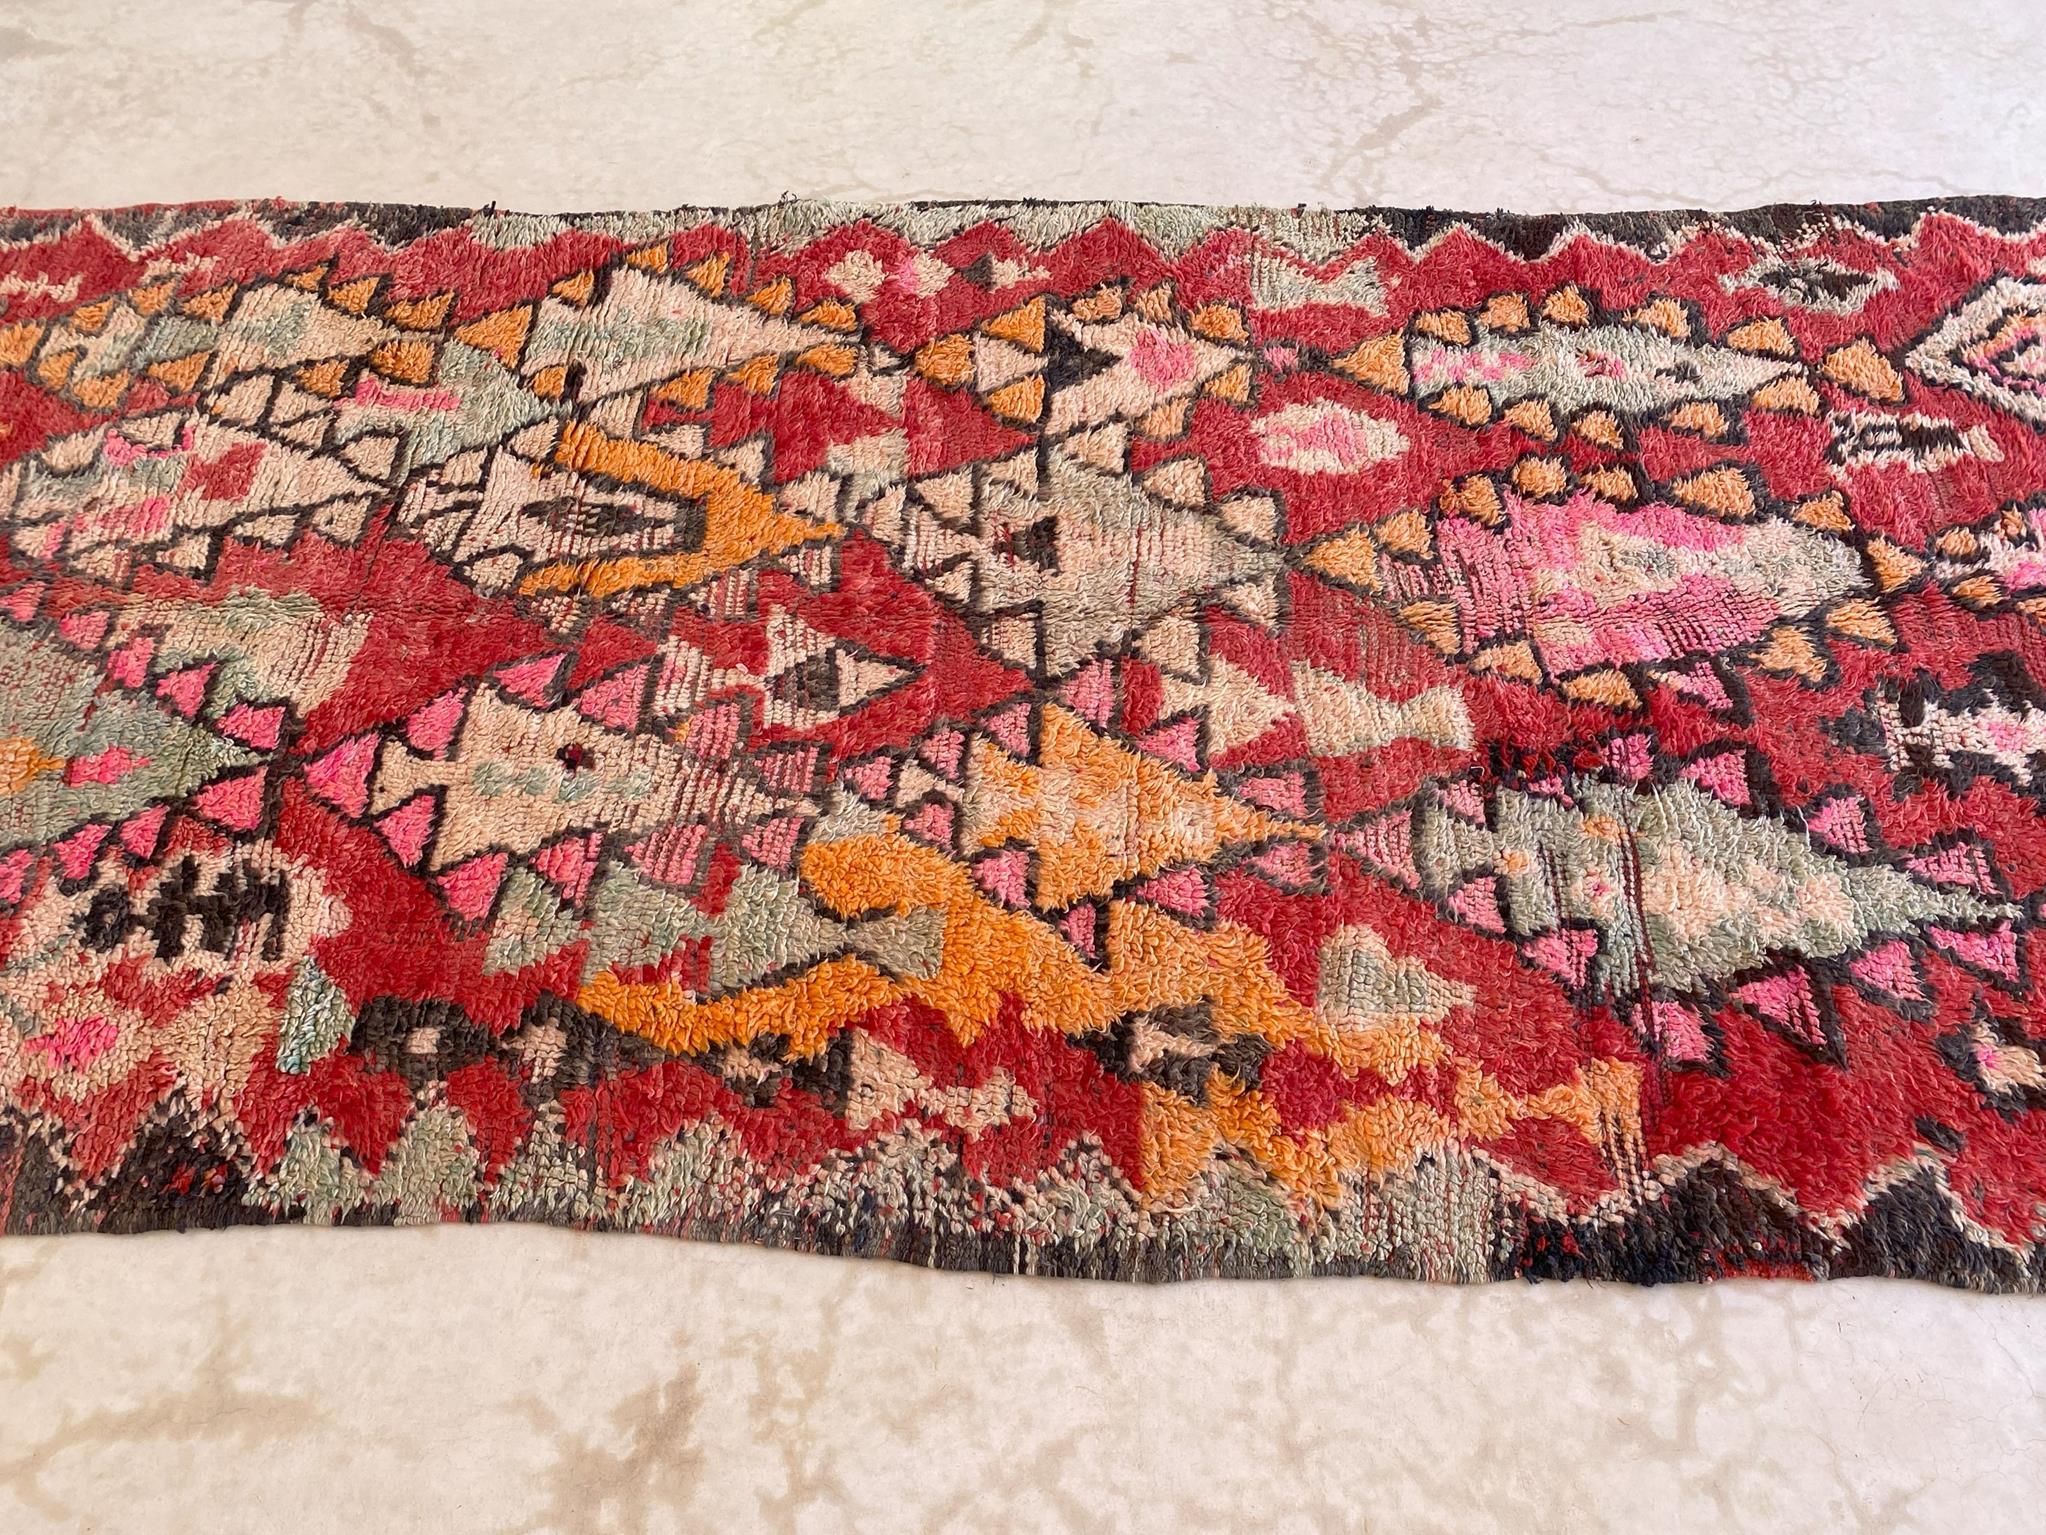 Hand-Woven Vintage Moroccan Rehamna rug - Red/pink - 5.9x12.2feet / 180x373cm For Sale